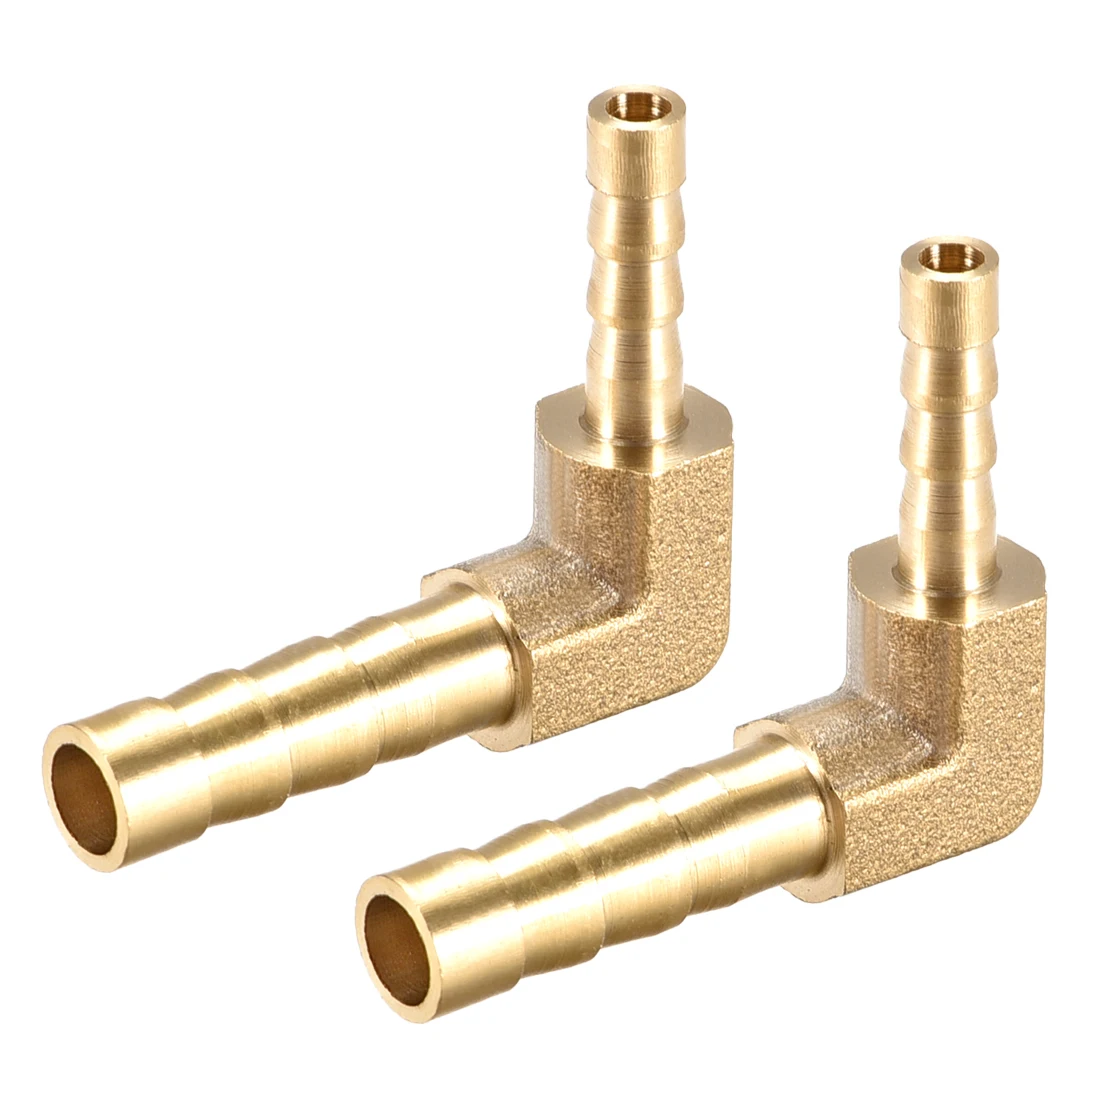 

uxcell 2pcs 6mm To 4mm Barb Brass Hose Fitting 90 Degree Elbow Pipe Connector Coupler Tubing Adapter for air, water, fuel